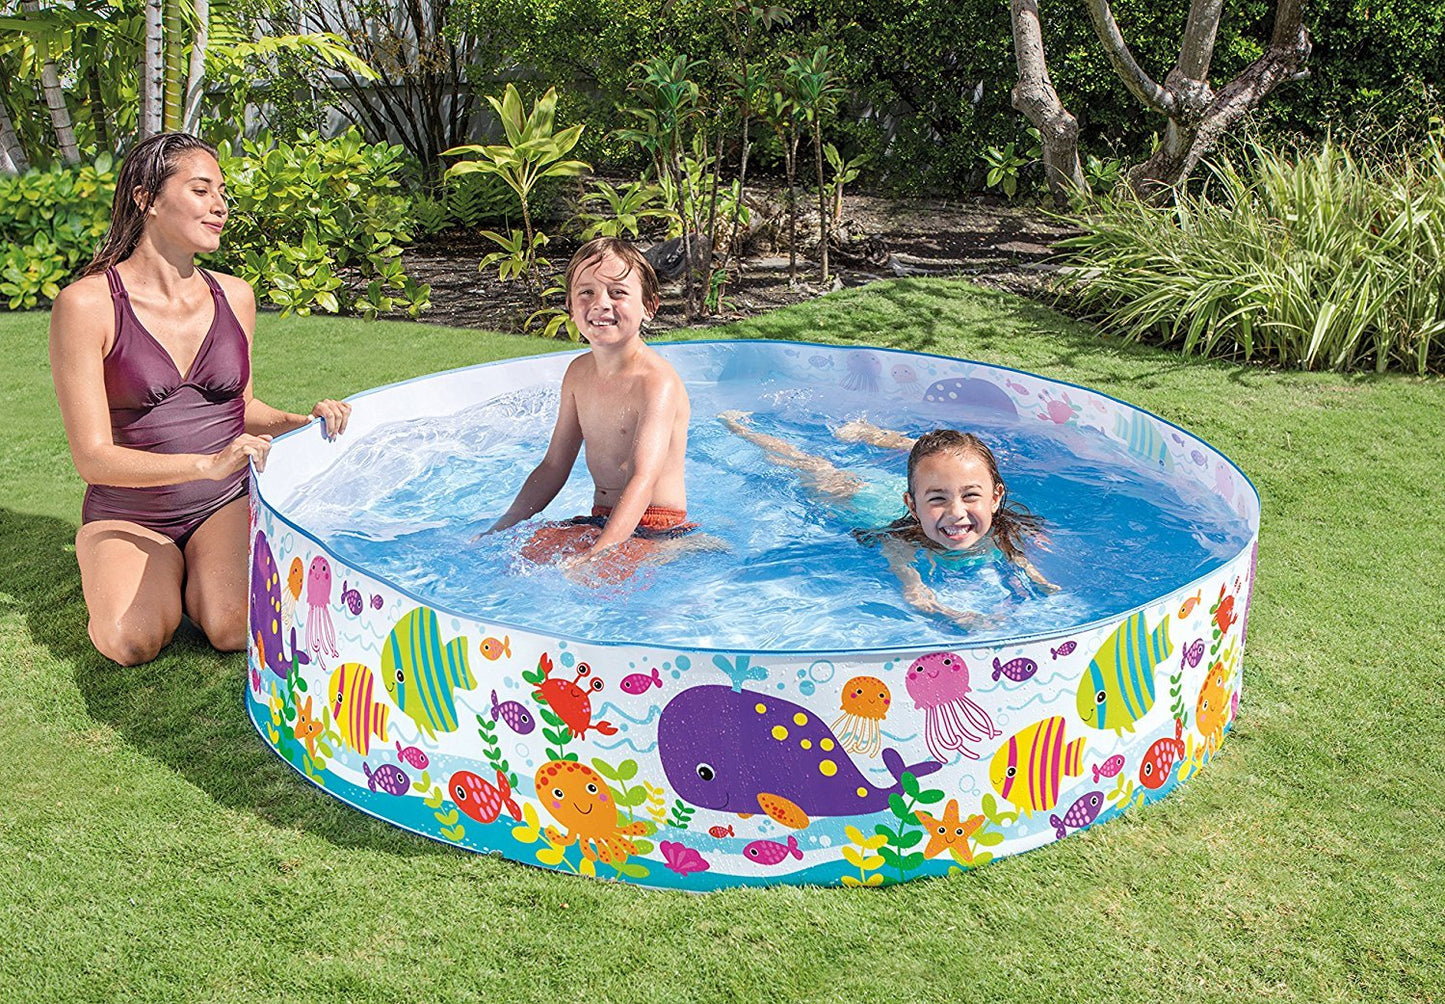 INTEX Snapset Pool, 6-Feet Multicolor, Durable PVC Material, 15-Inch Depth with Repair Patch, Ideal for Summer Fun and Outdoor Activities